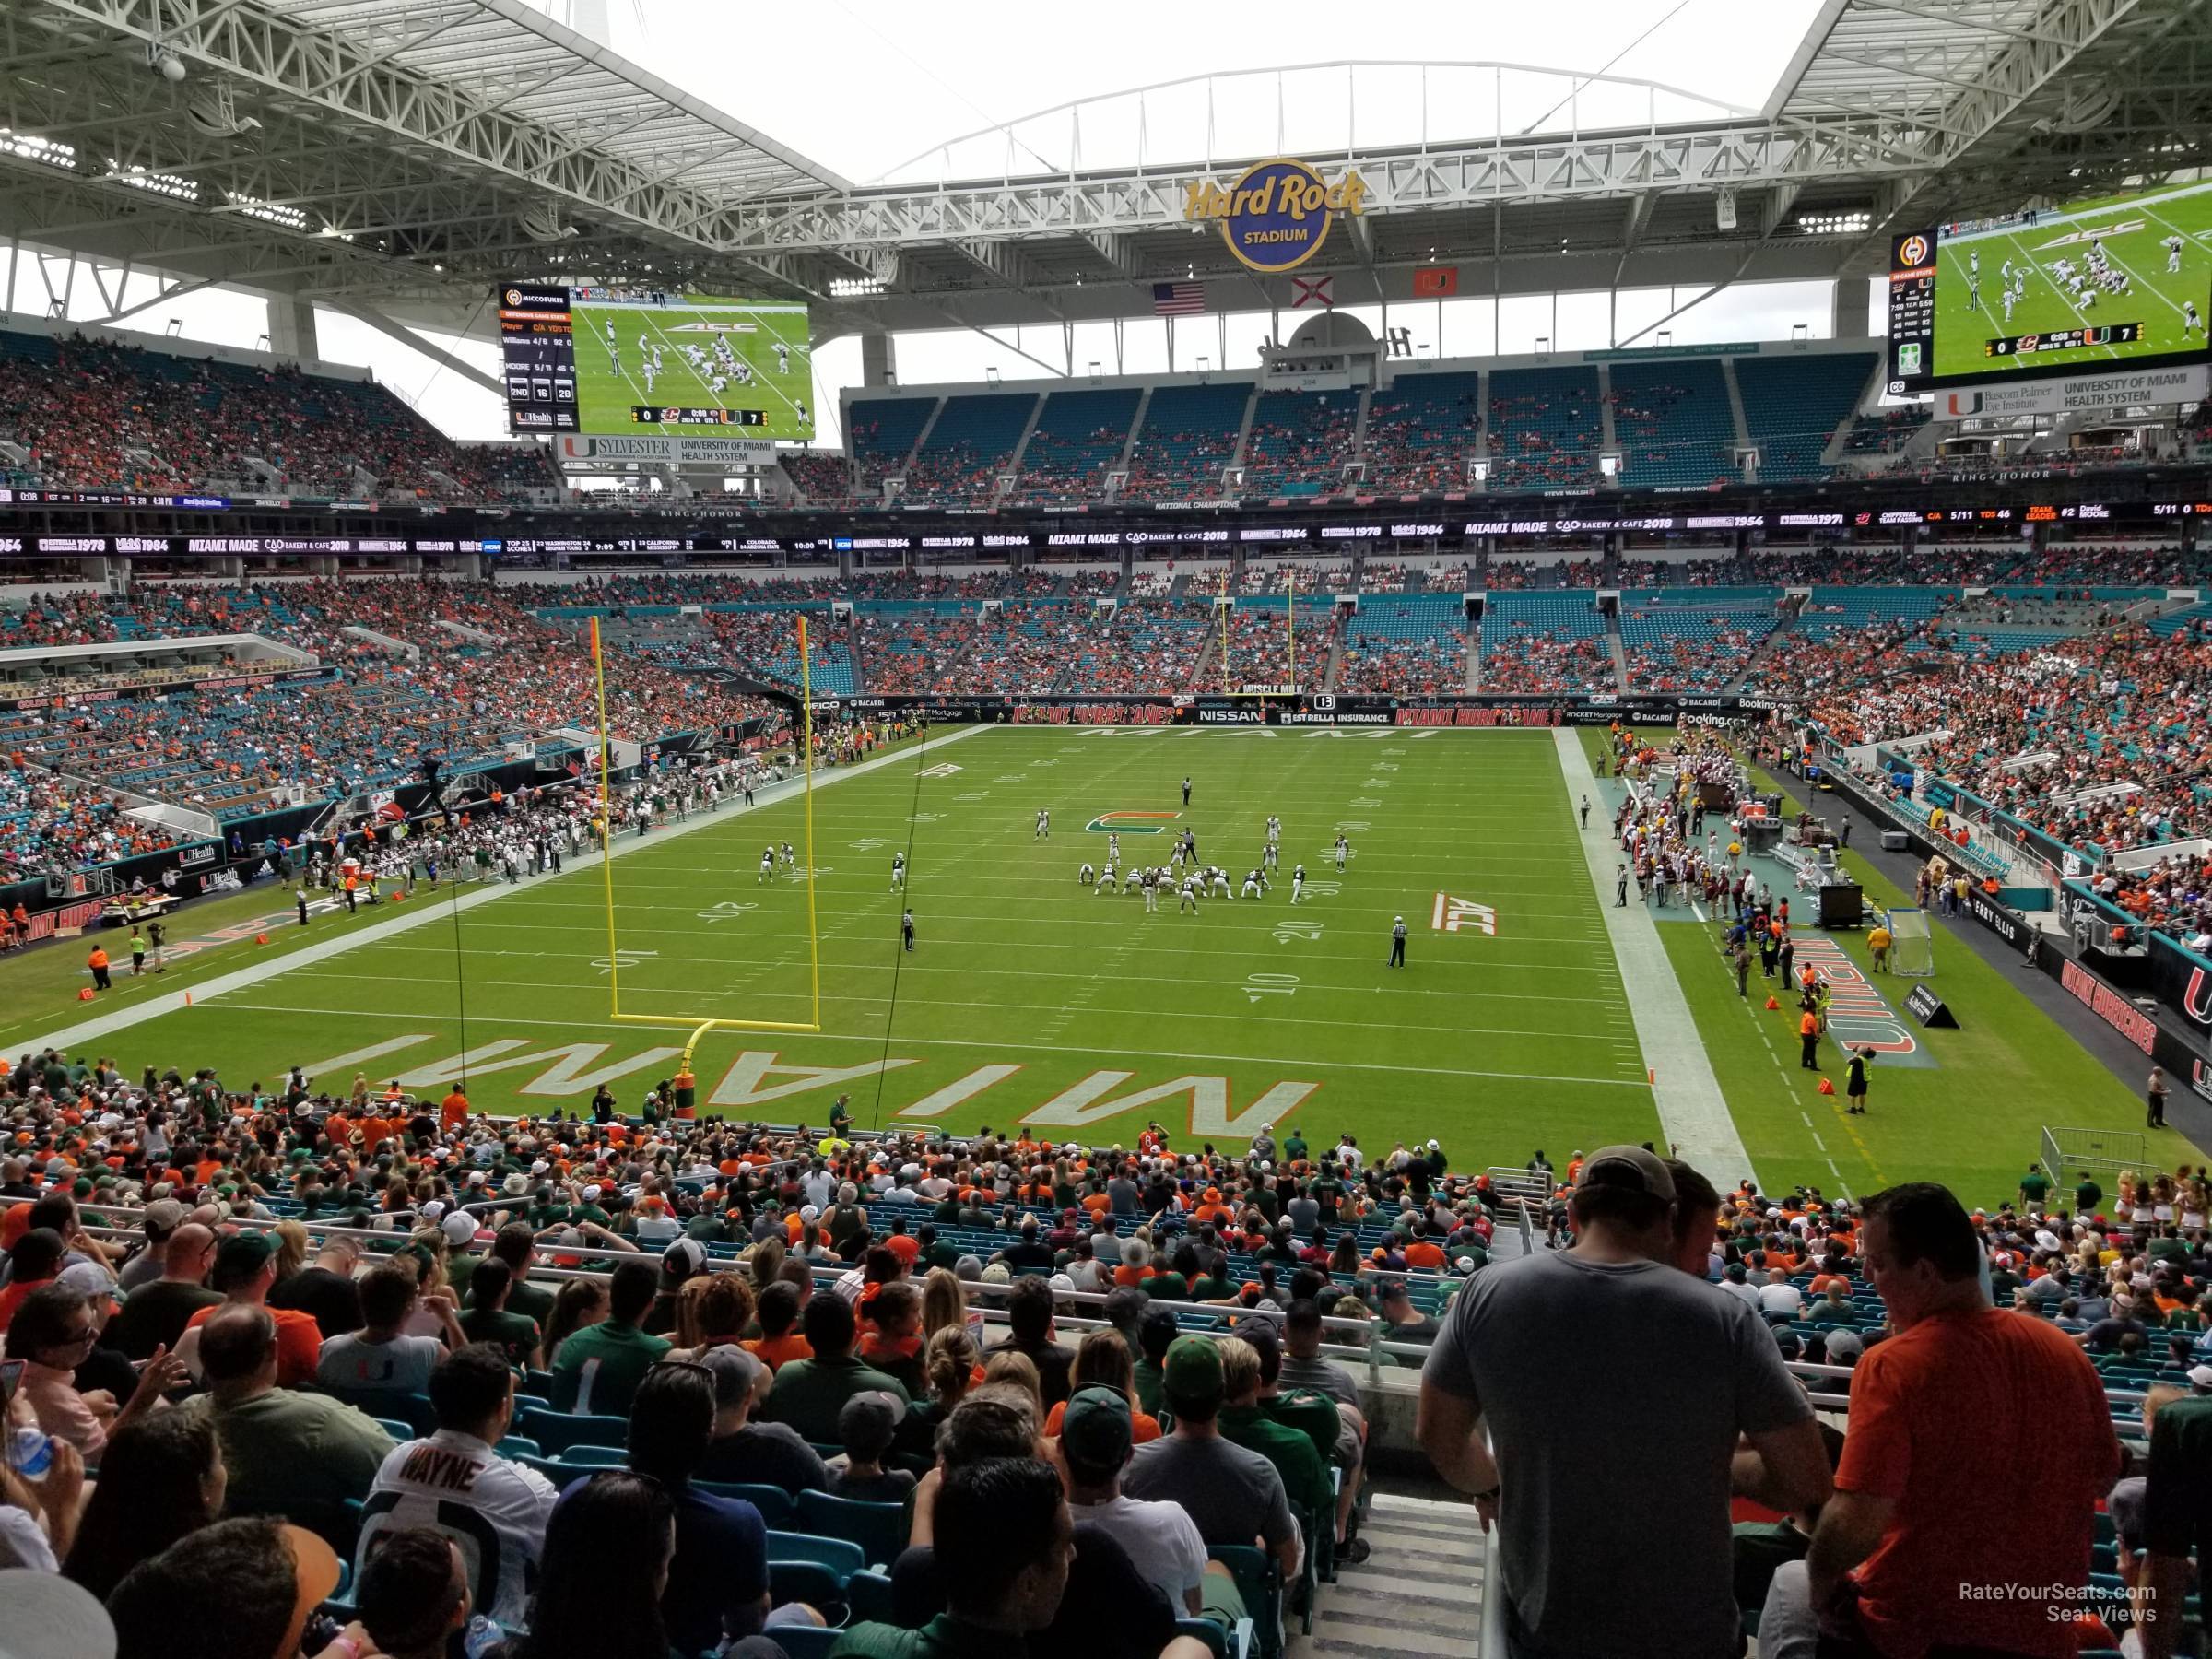 section 231, row 10 seat view  for football - hard rock stadium